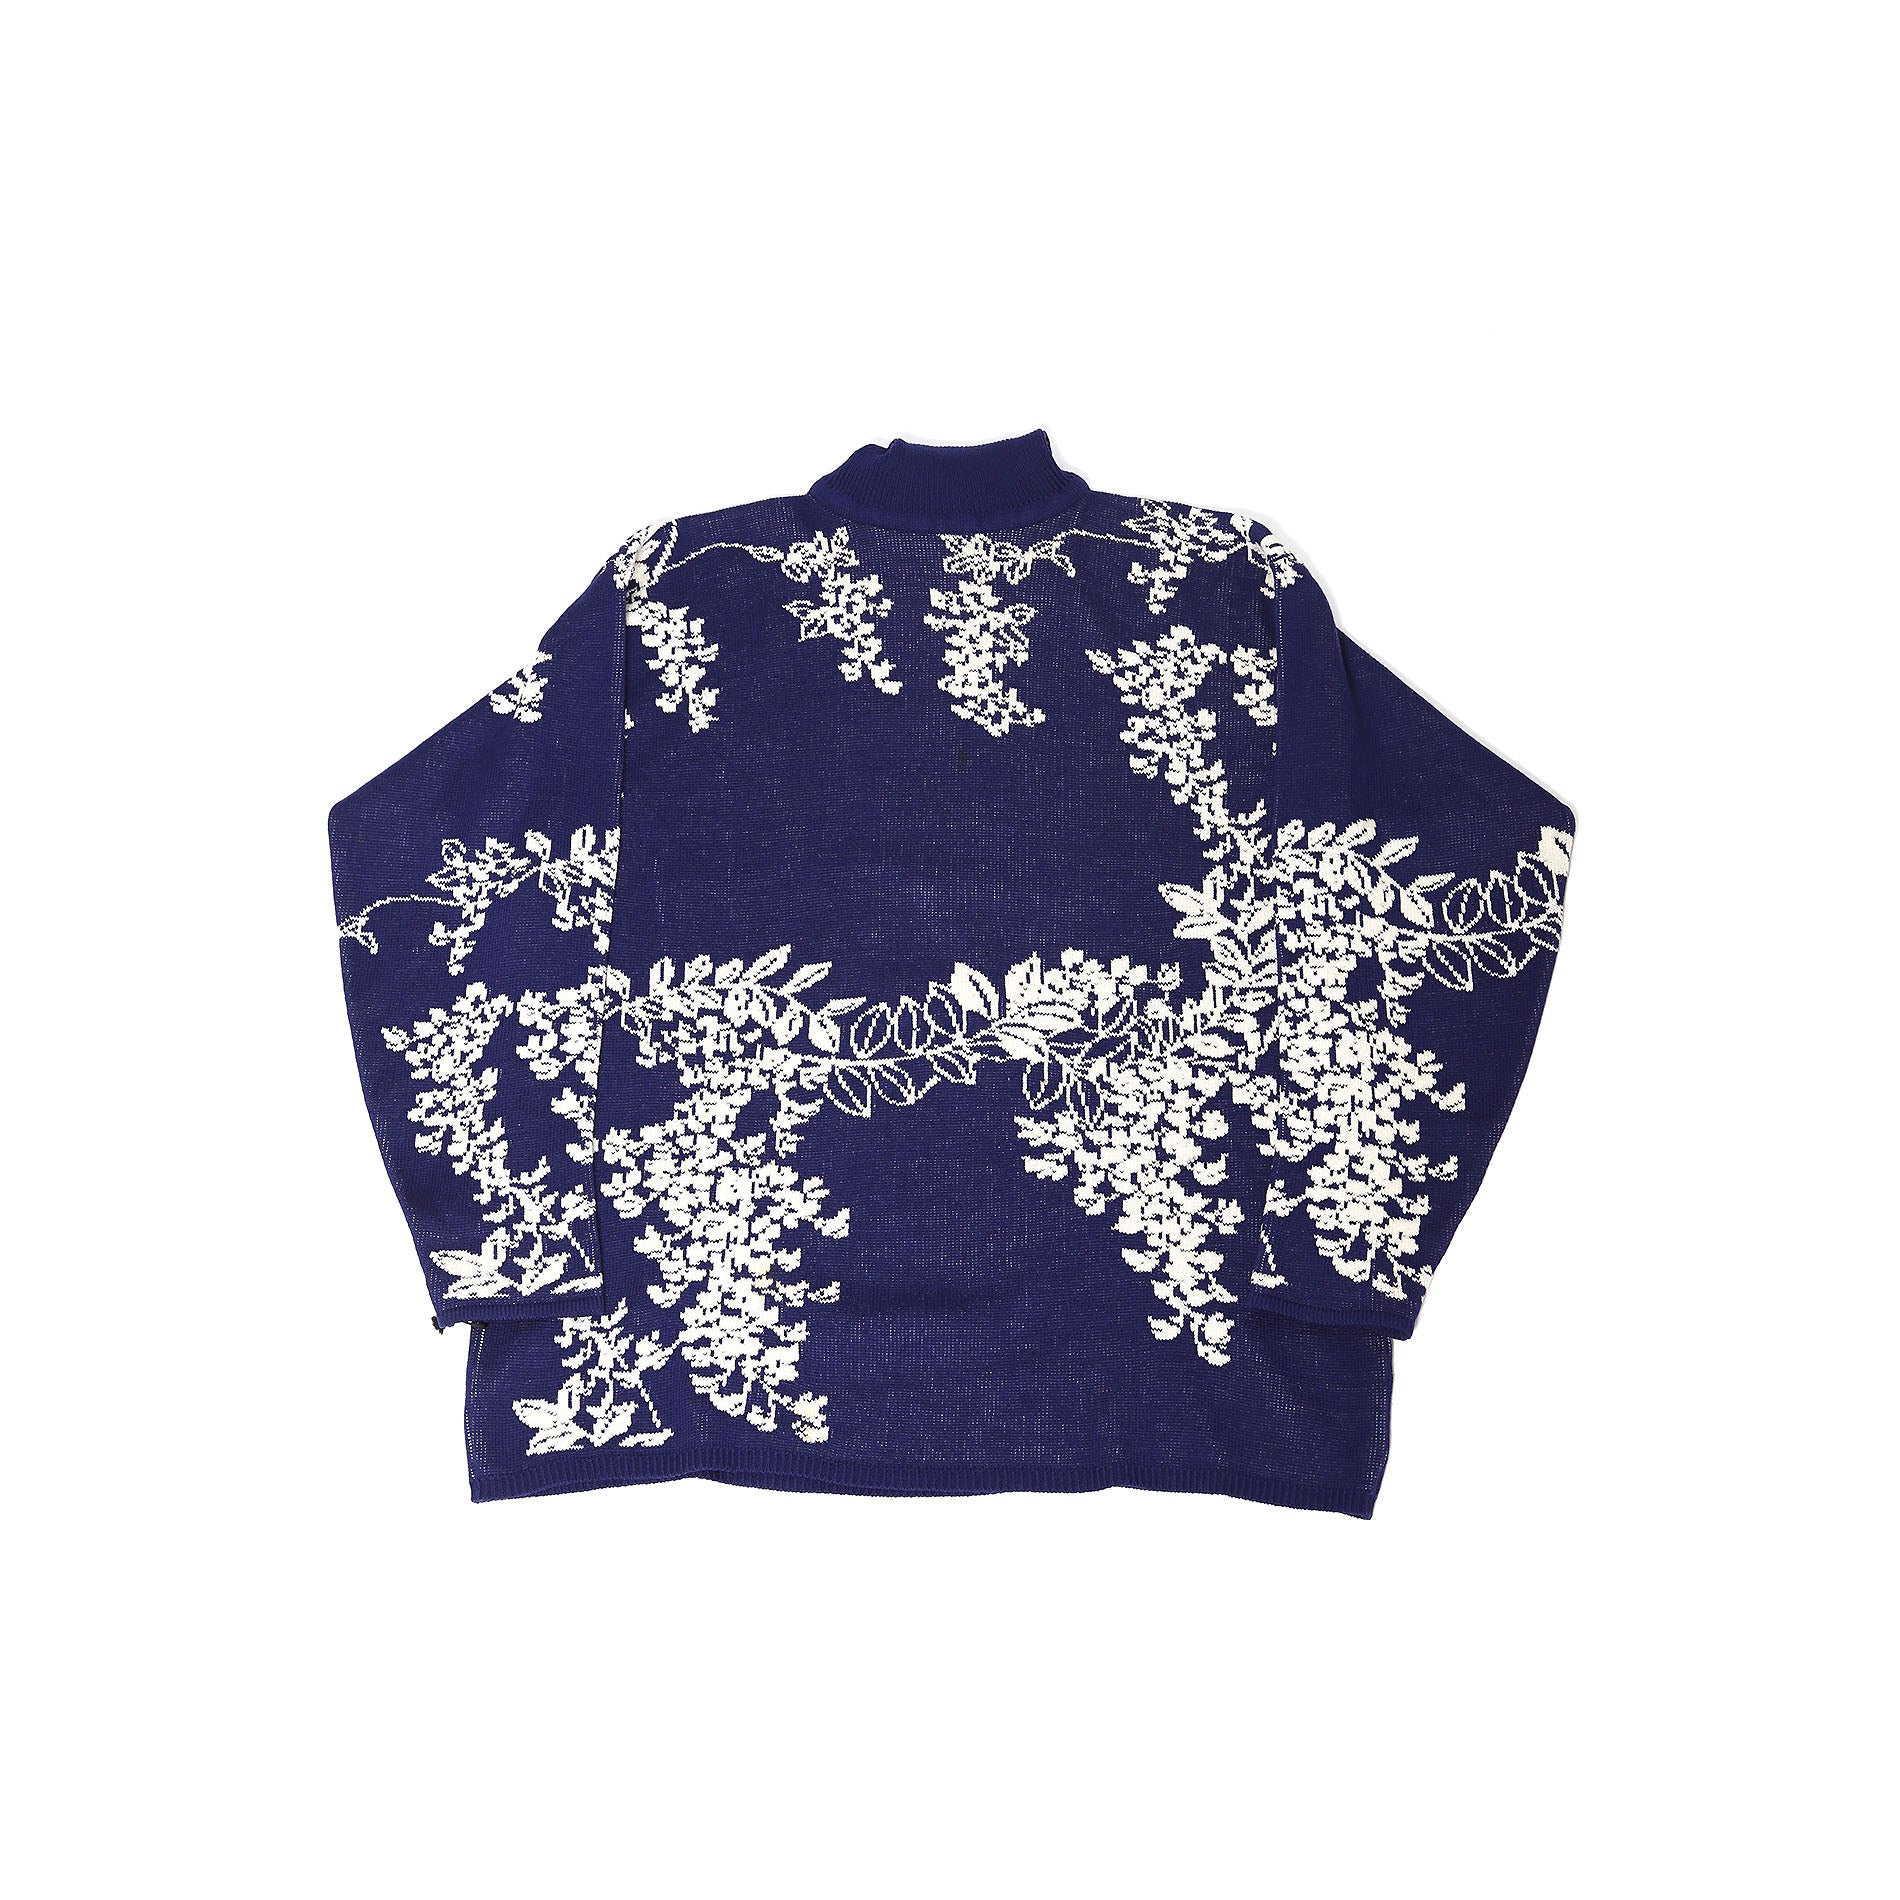 Yohji Yamamoto Pour Homme 80s Floral Blue Oversized Roll Neck Knit Sweater